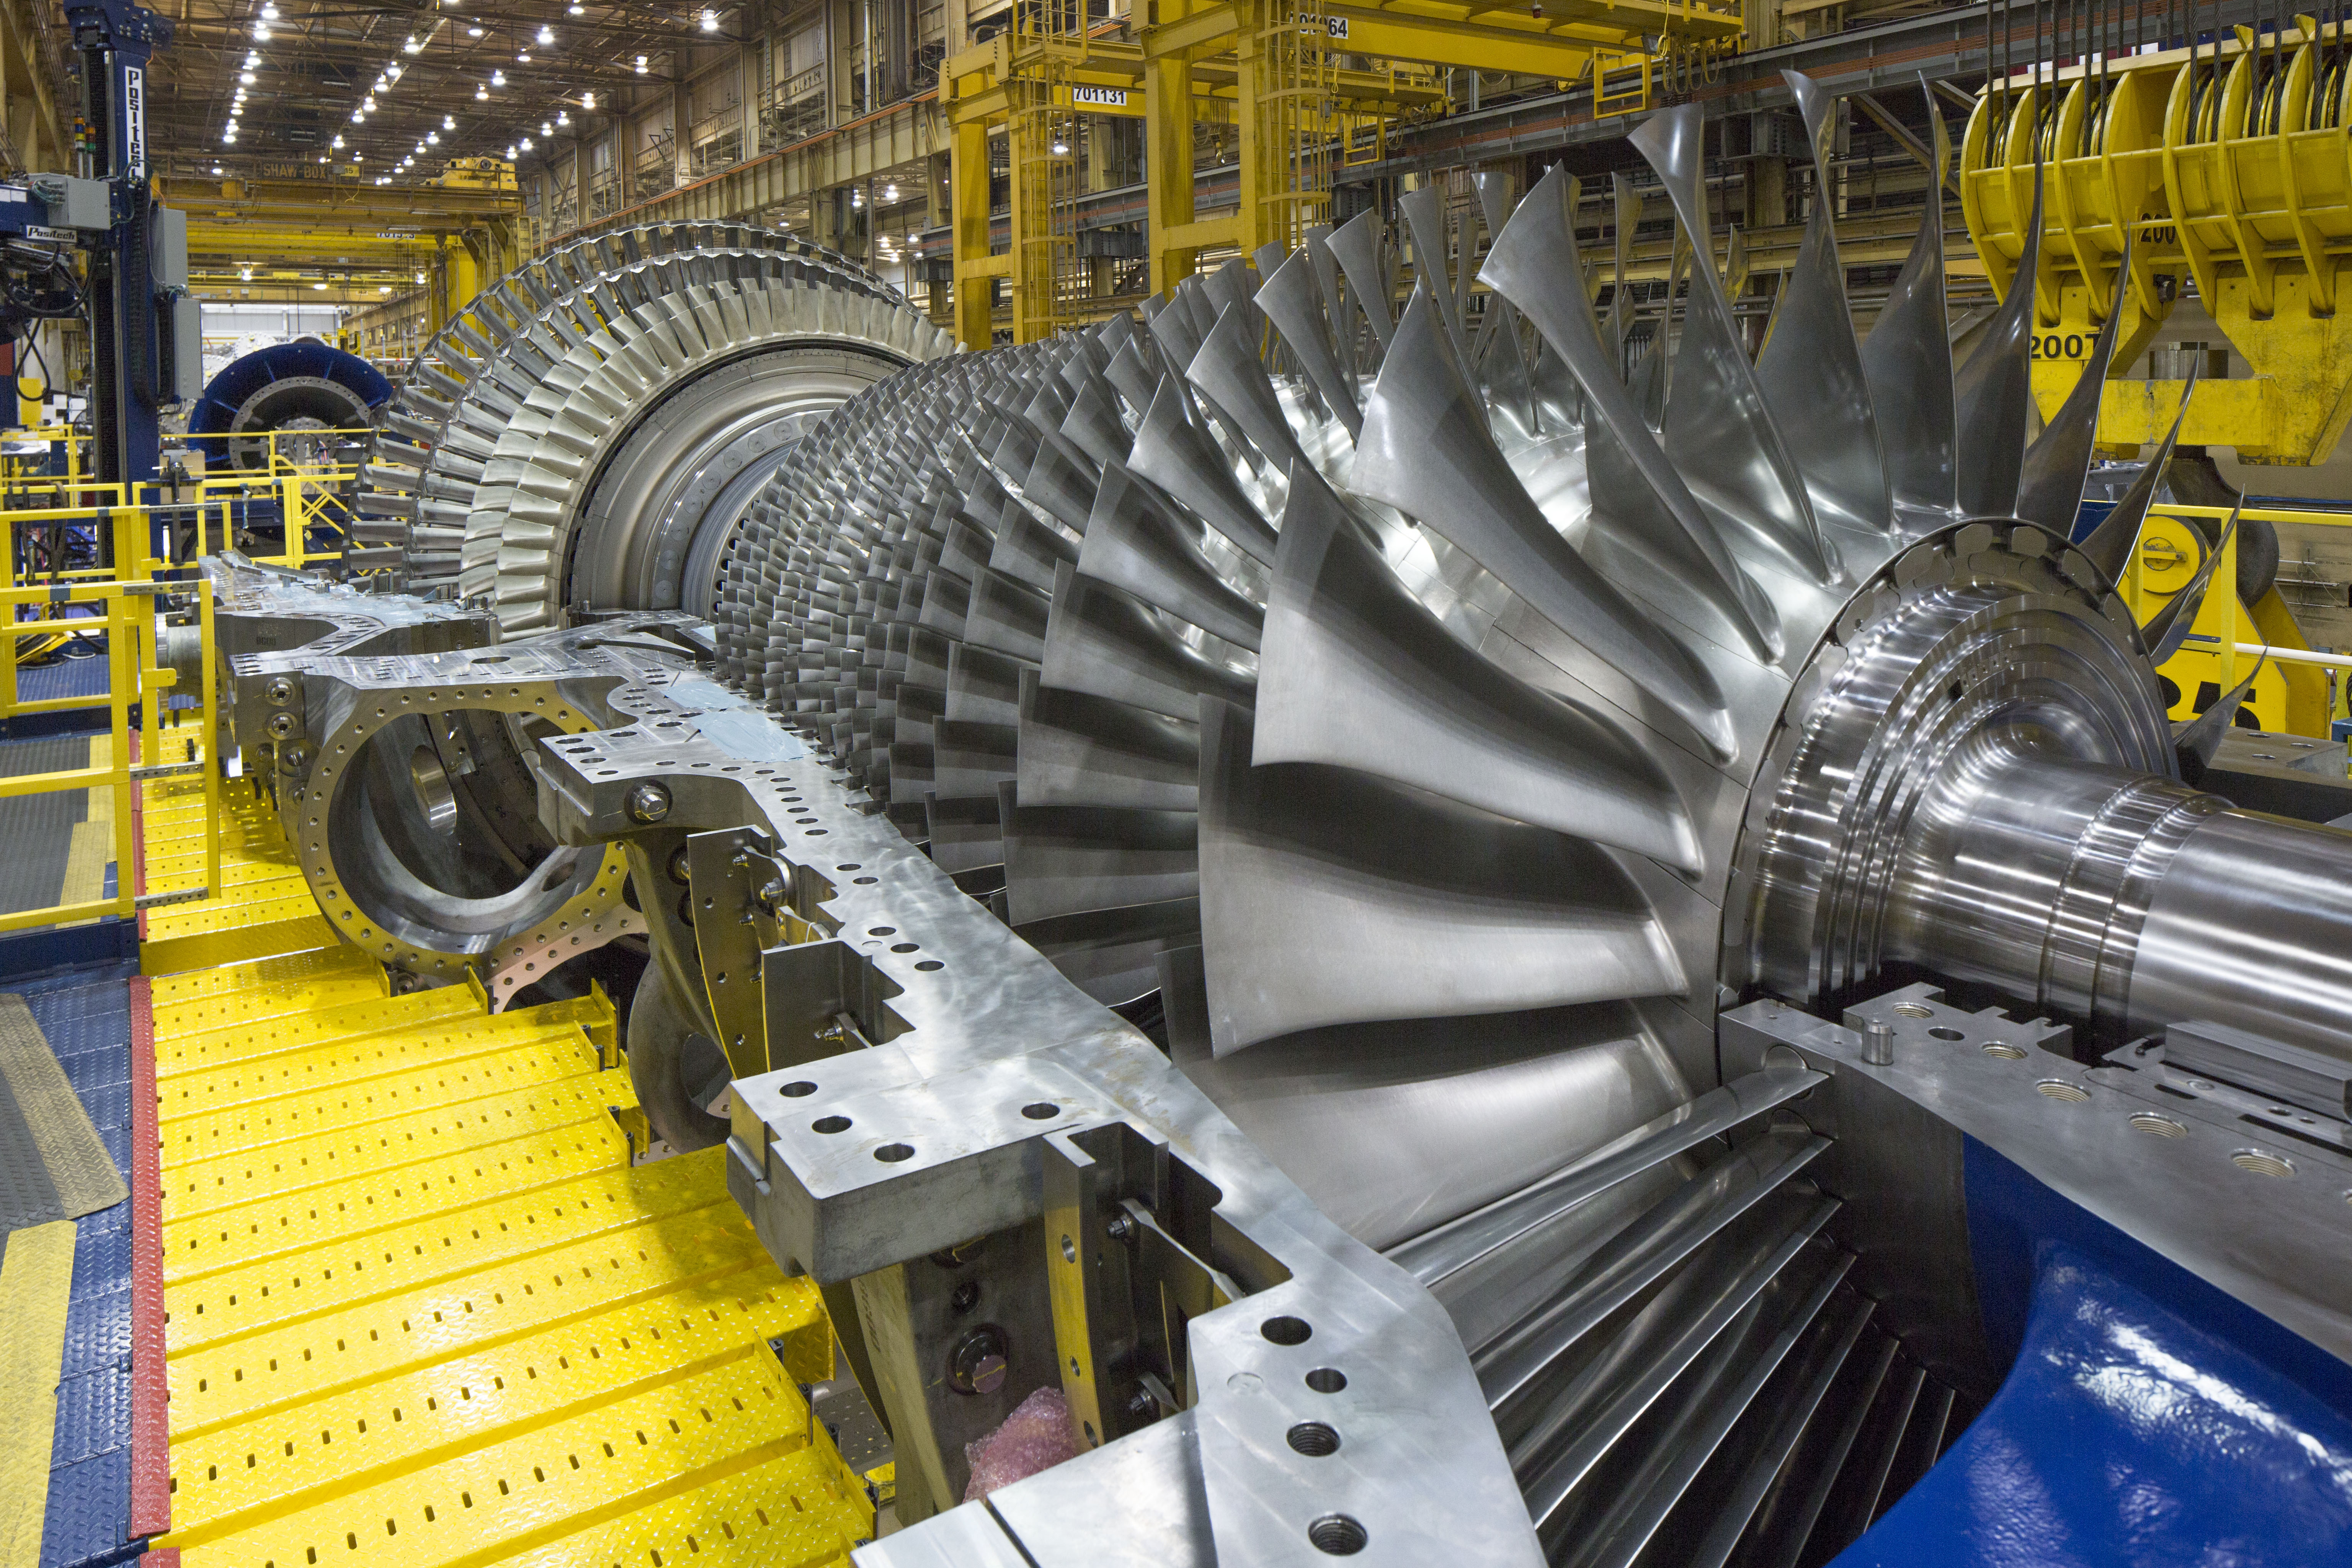 Turbines powered by steam фото 60